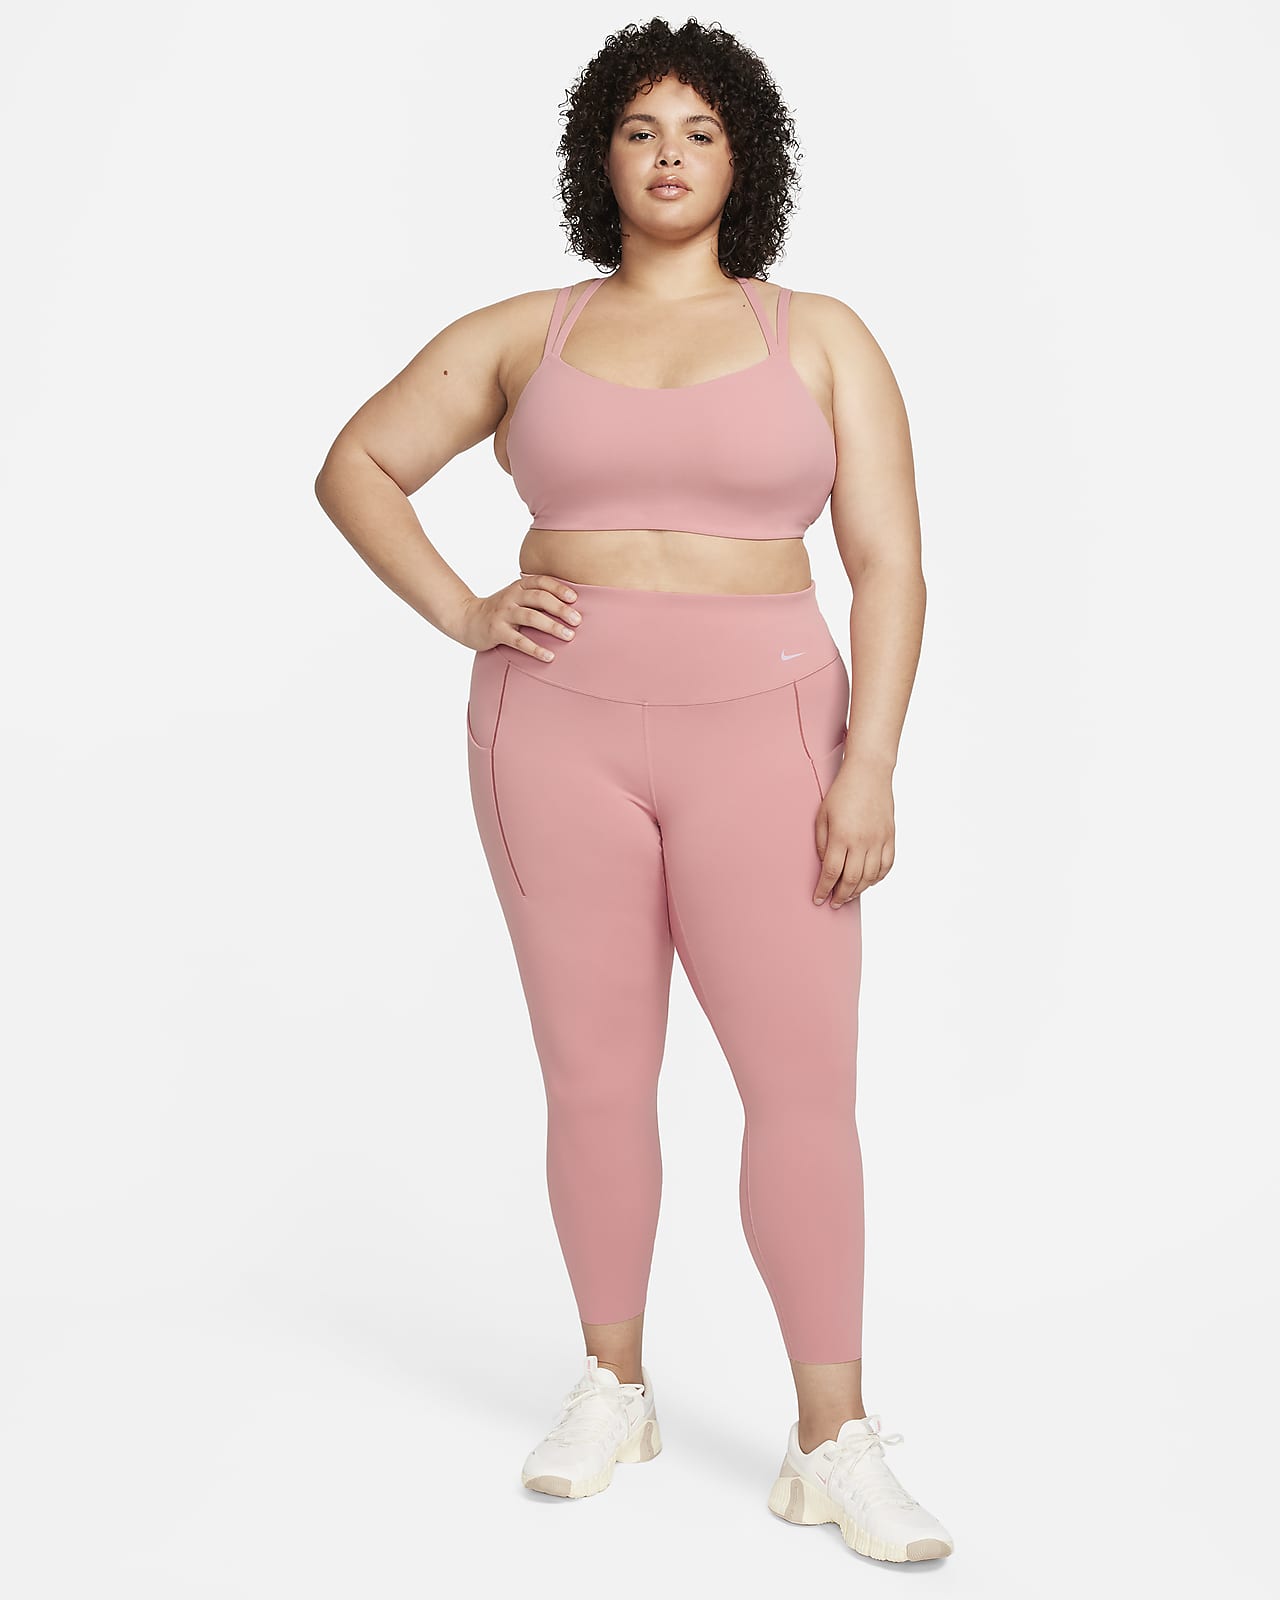 The Best Crop Tops For Plus Size Women To Wear This SUm